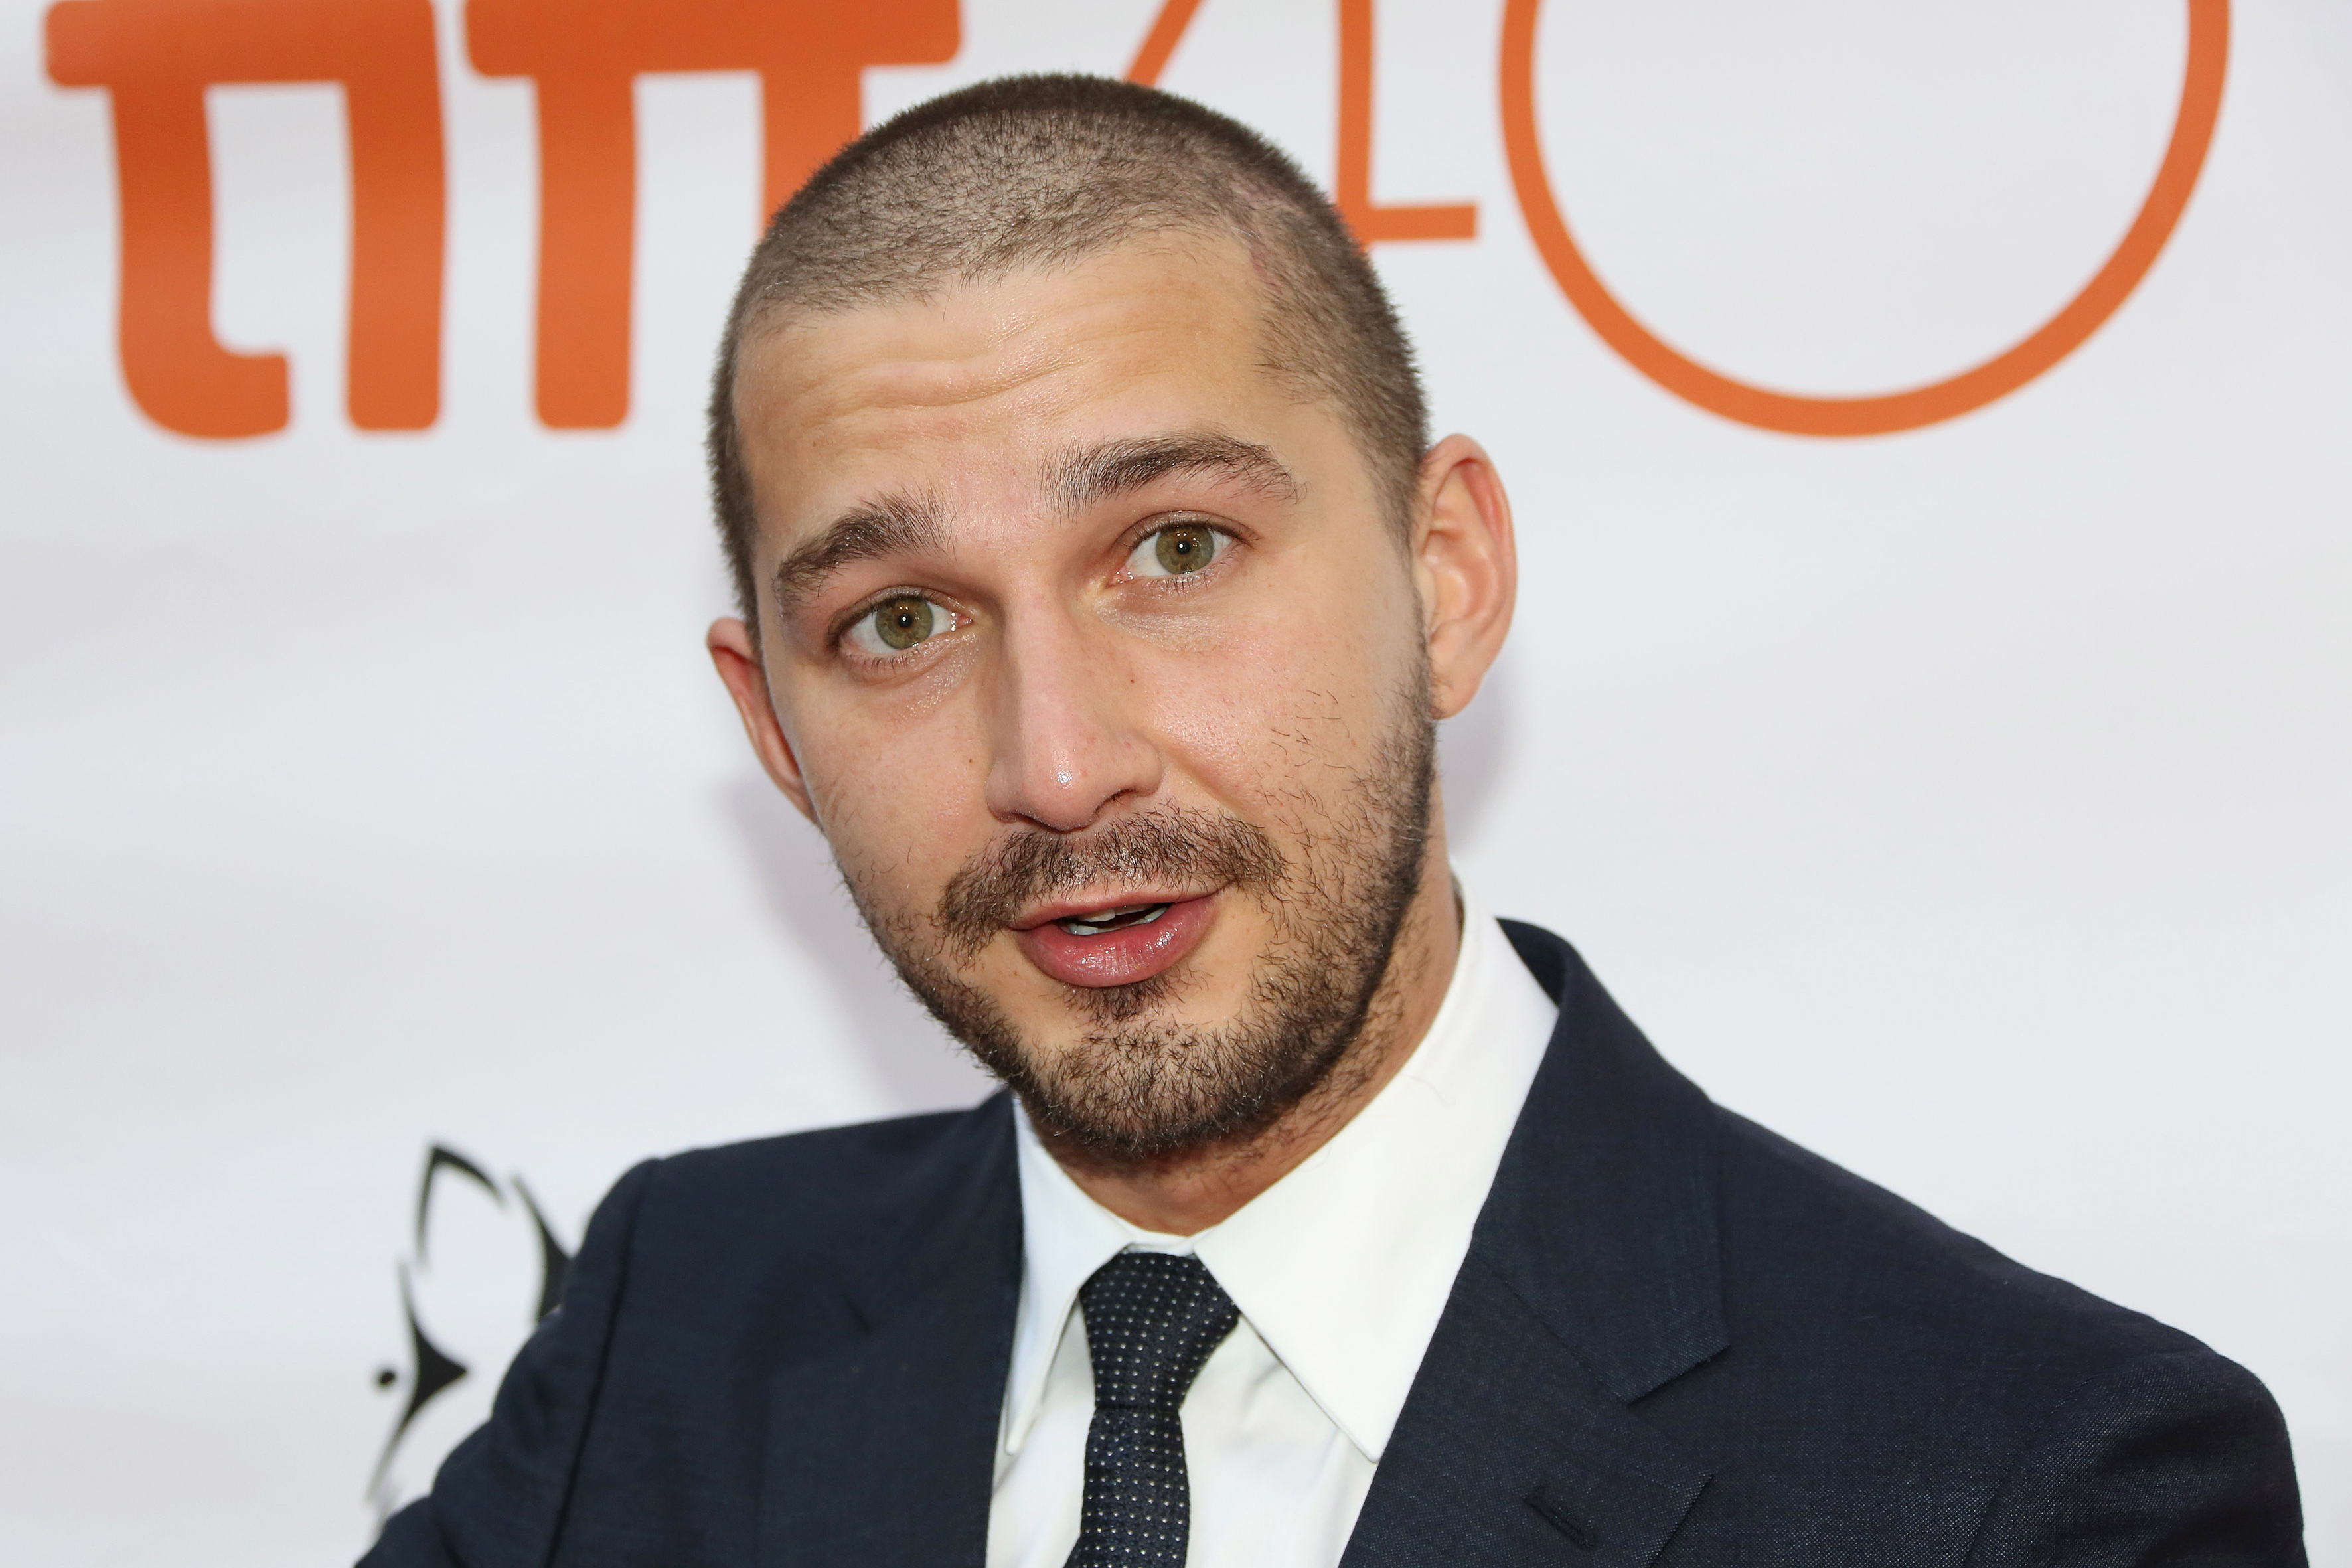 A throwback photo of Shia LaBeouf, seen wearing a black suit and polka dotted tie, paired with a plain white inner T-shirt.